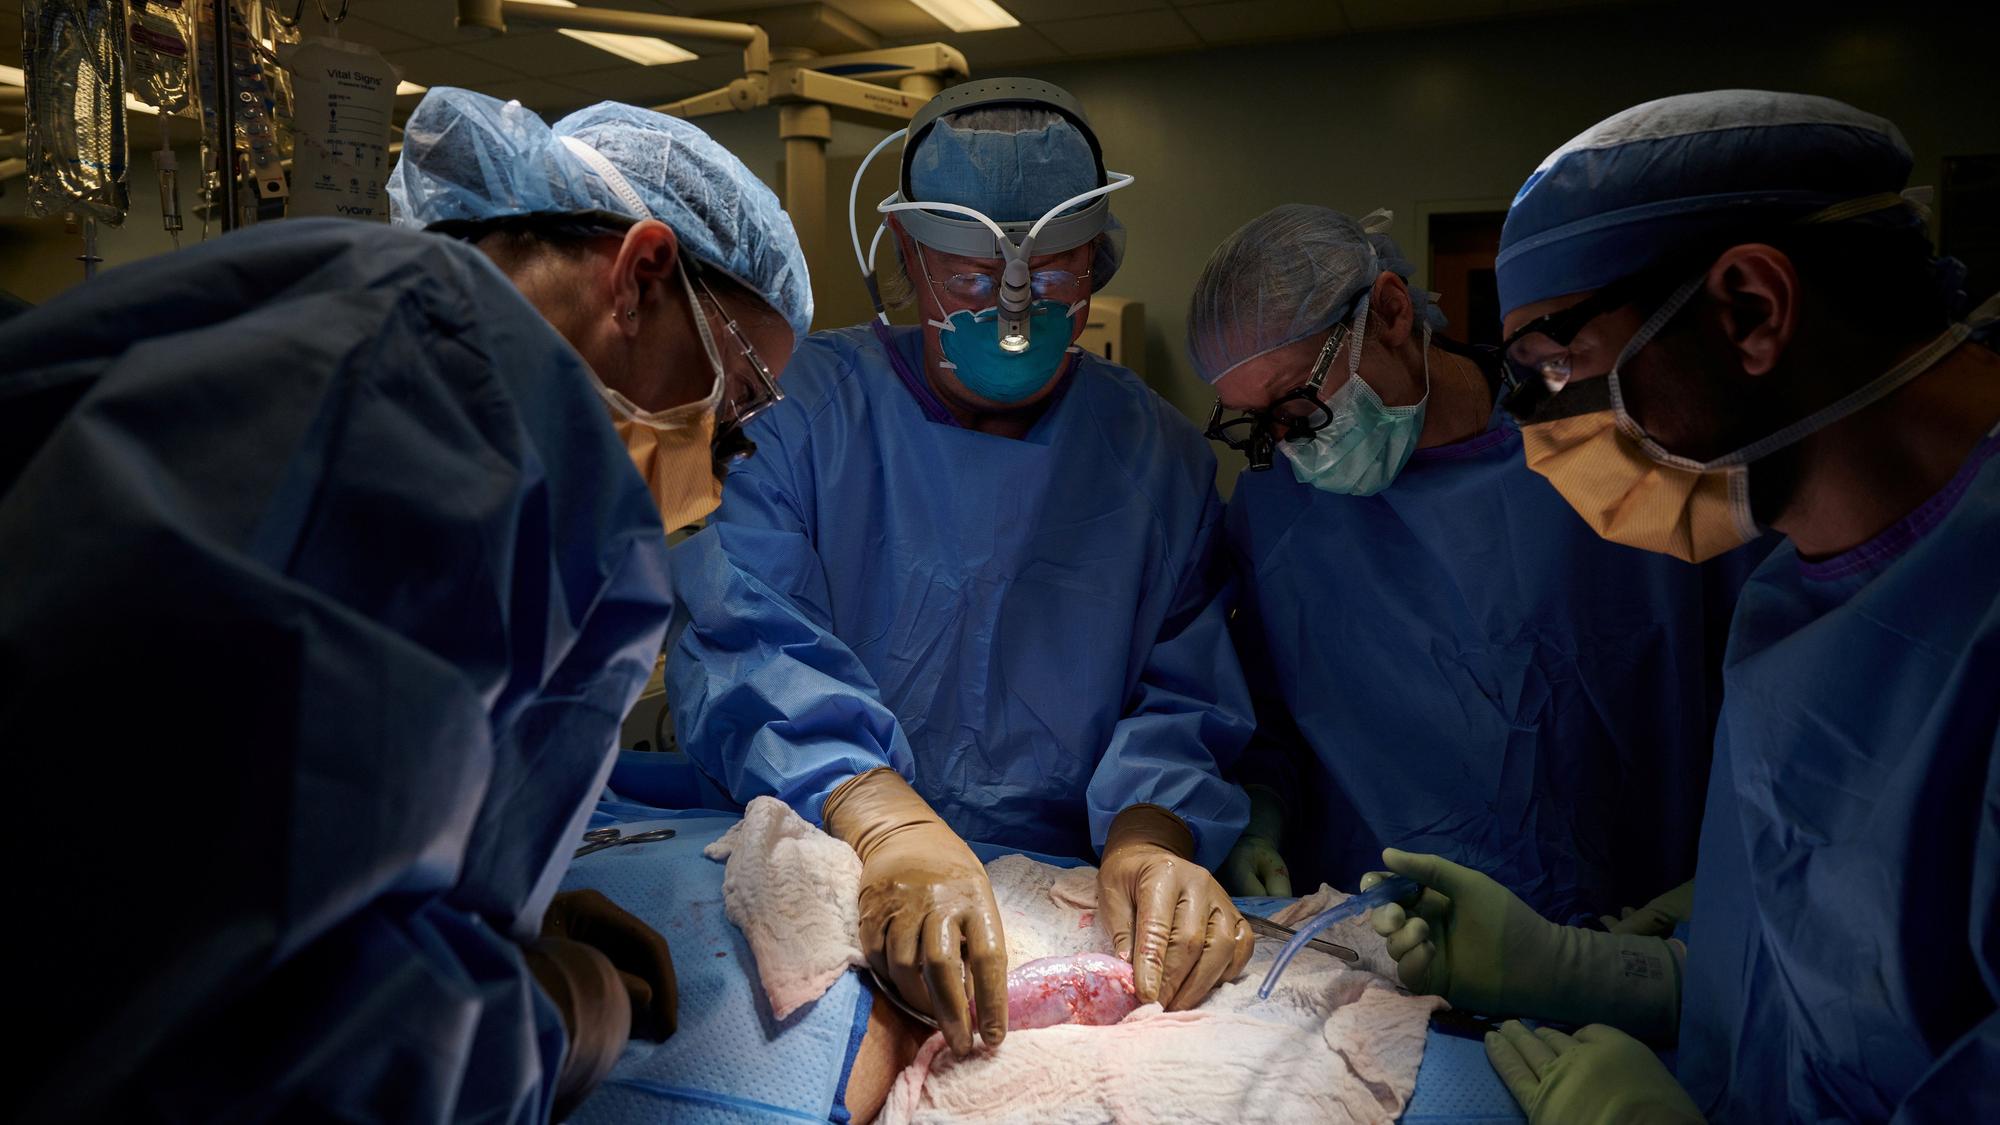 The surgical team examines the pig kidney for any signs of hyperacute rejection, as the organ was implanted outside the body to allow for observation and tissue sampling during the 54-hour study period, at NYU Langone in New York, U.S., in this undated handout photo. Joe Carrotta for NYU Handout via REUTERS NO RESALES. NO ARCHIVES. THIS IMAGE HAS BEEN SUPPLIED BY A THIRD PARTY.